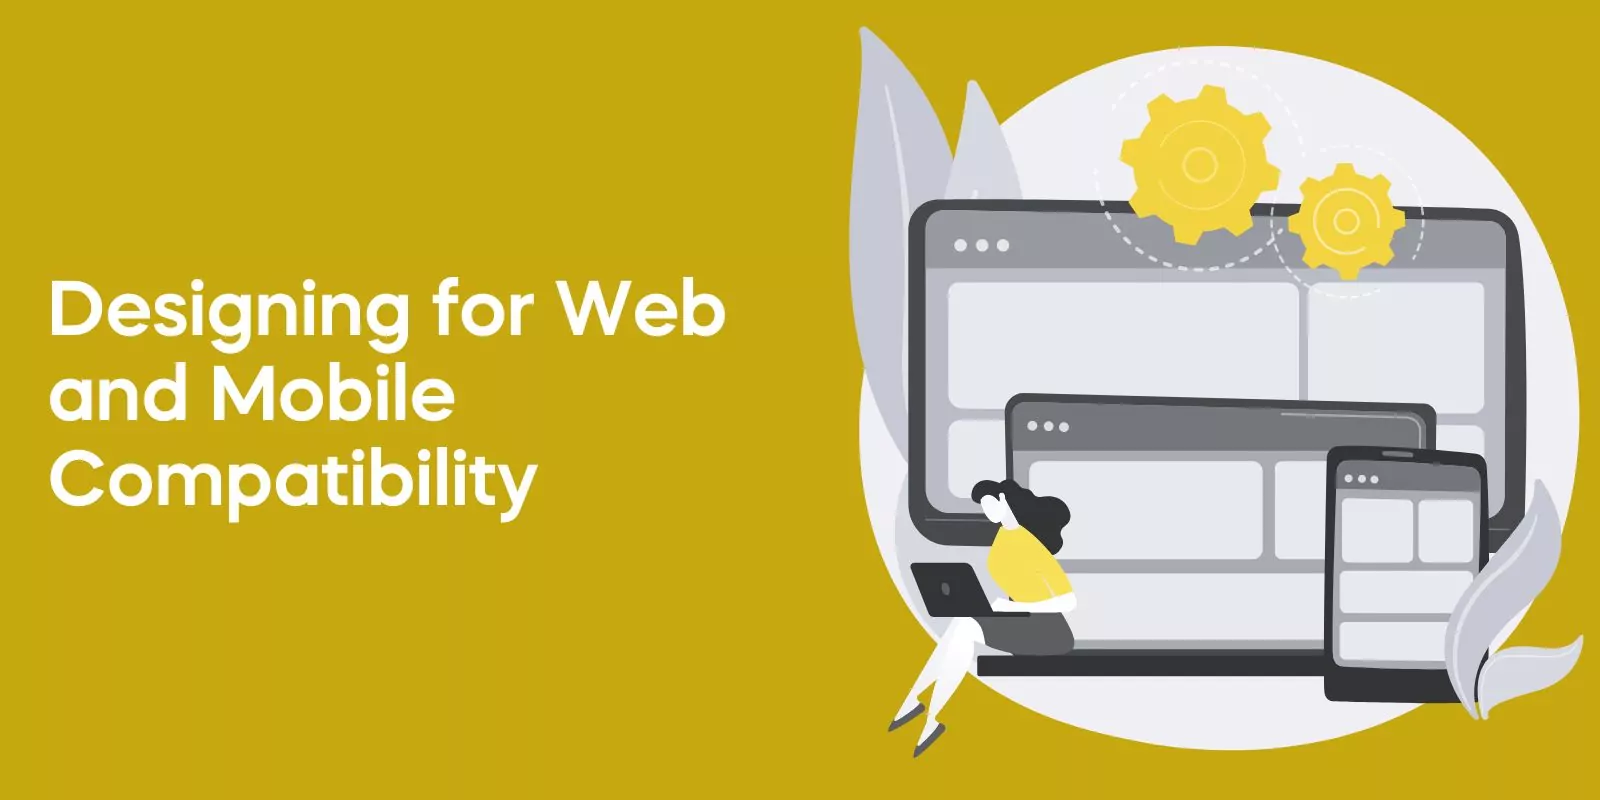 Designing for Web and Mobile Compatibility